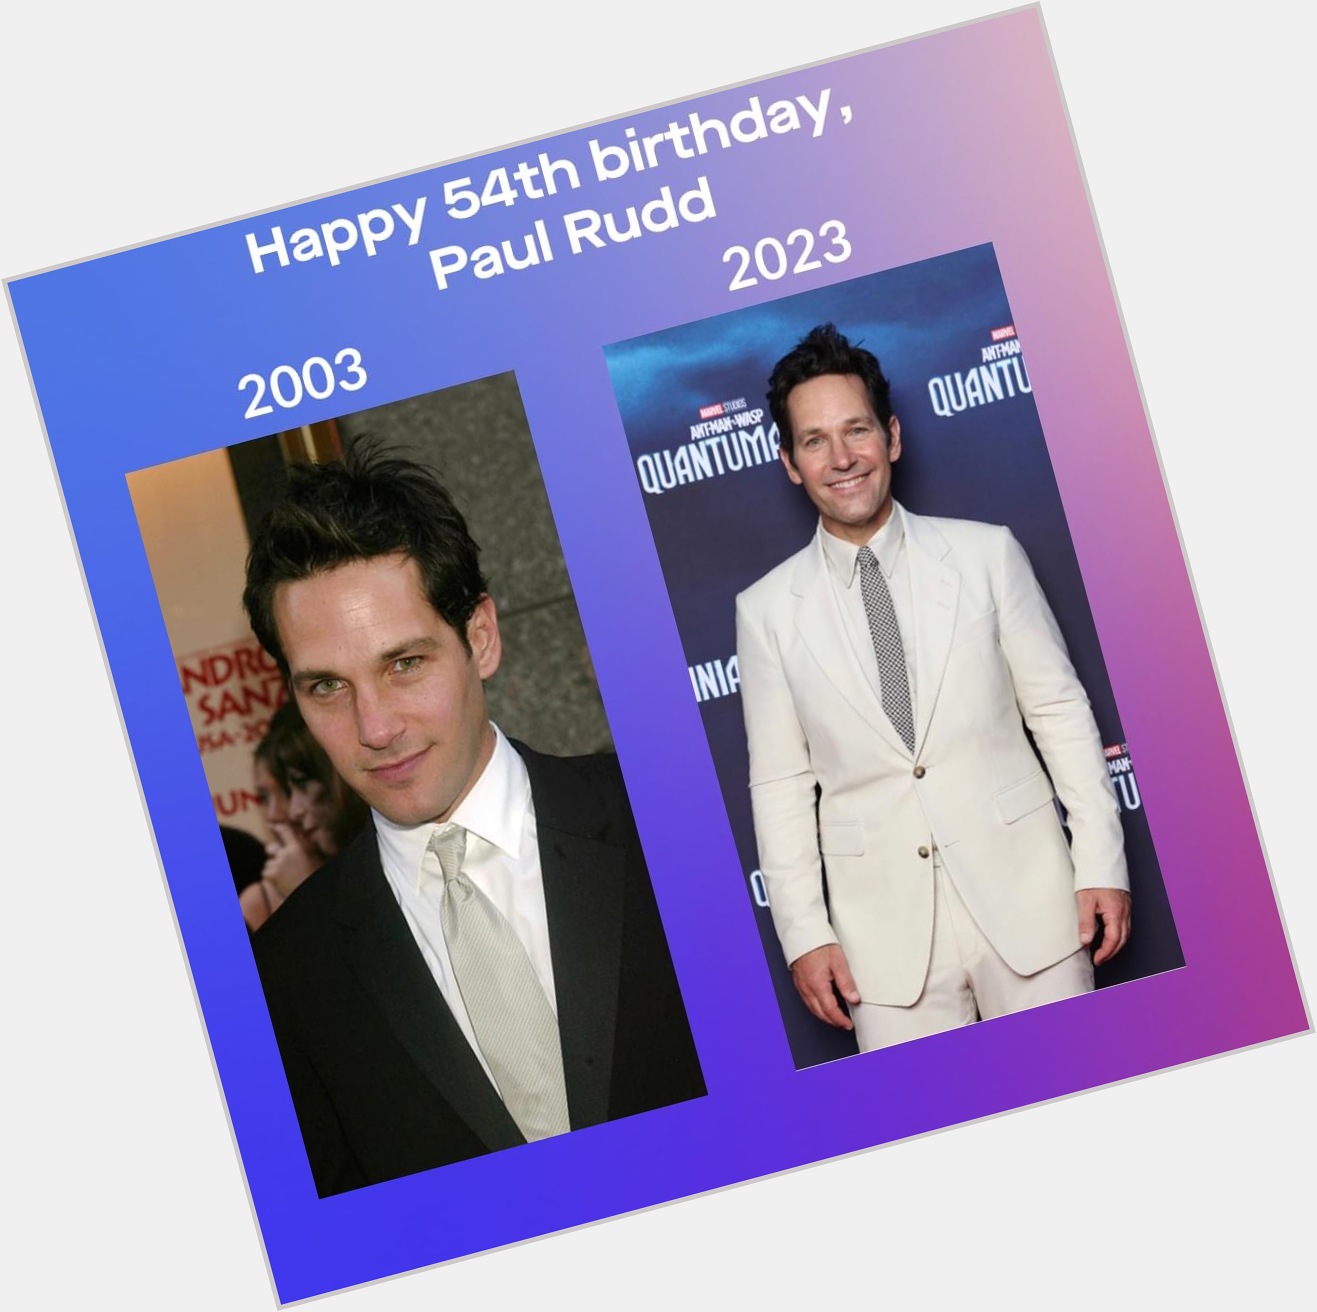 Happy birthday to Paul Rudd, who is allegedly 54 today. 